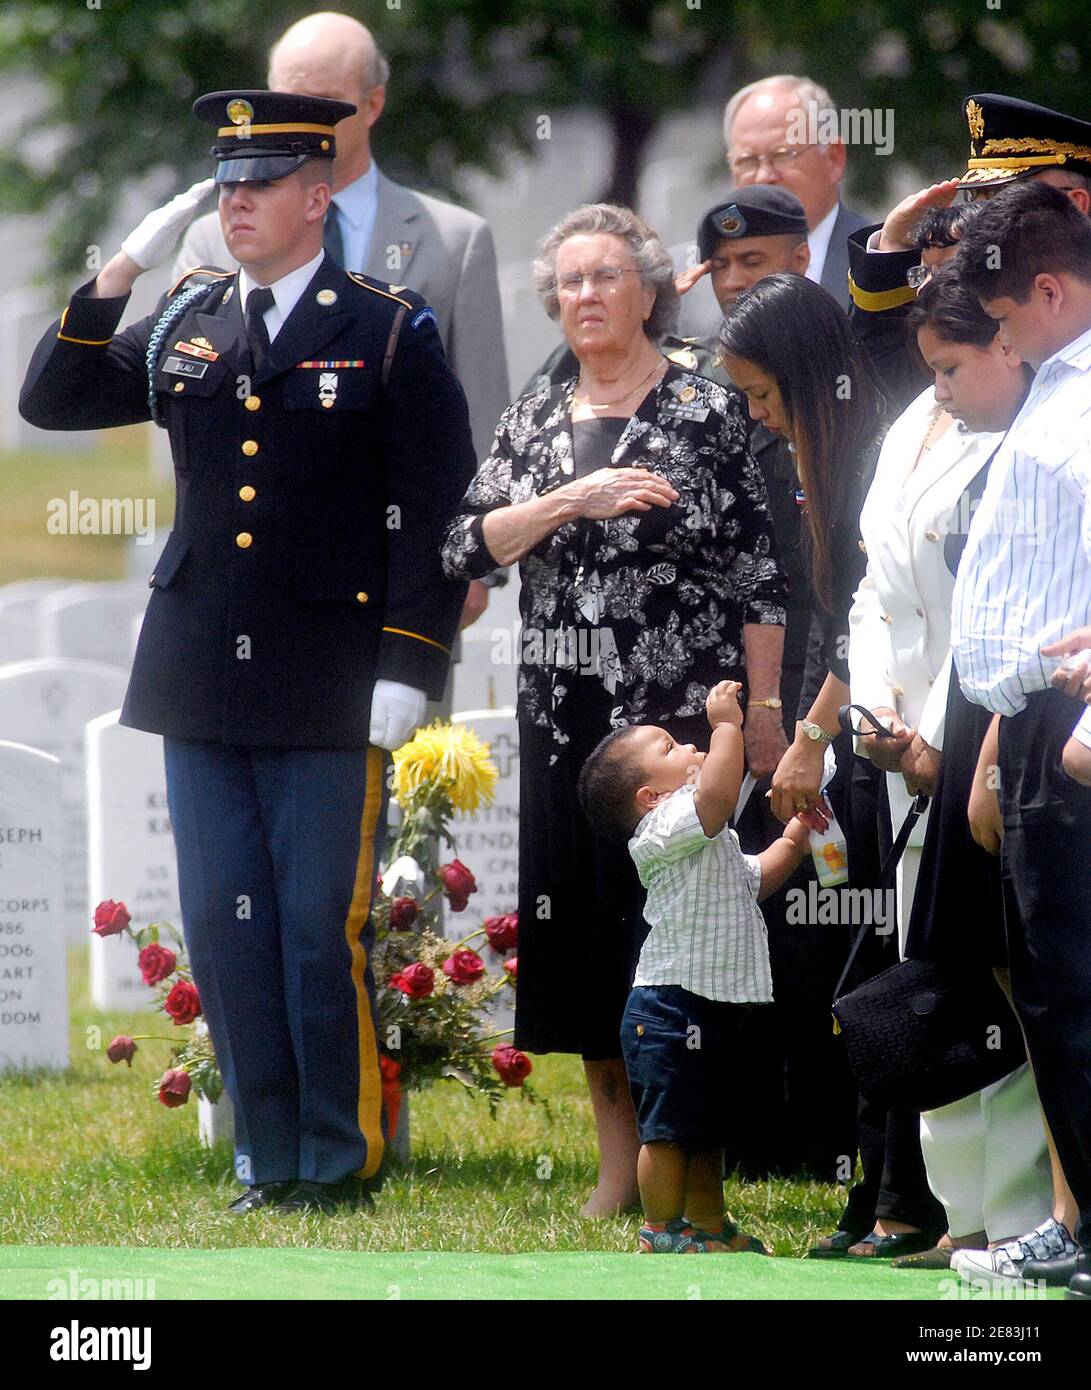 Eighteen-month-old Greg Sutton reaches for his mother, Joane Sutton the wife of Army Sgt. 1st Class Greg Lamonte Sutton, 38, who died on June 6 after his vehicle struck an improvised explosive device in Baghdad, is hold in Arlington Cemetery June 20 2007 in Virginia. Since the begining of the war, 378 soldiers have been buried in Arlington Cemetery.(Pictured: Greg Sutton, Joane Sutton) Photo by Olivier Douliery/ABACAPRESS.COM Stock Photo